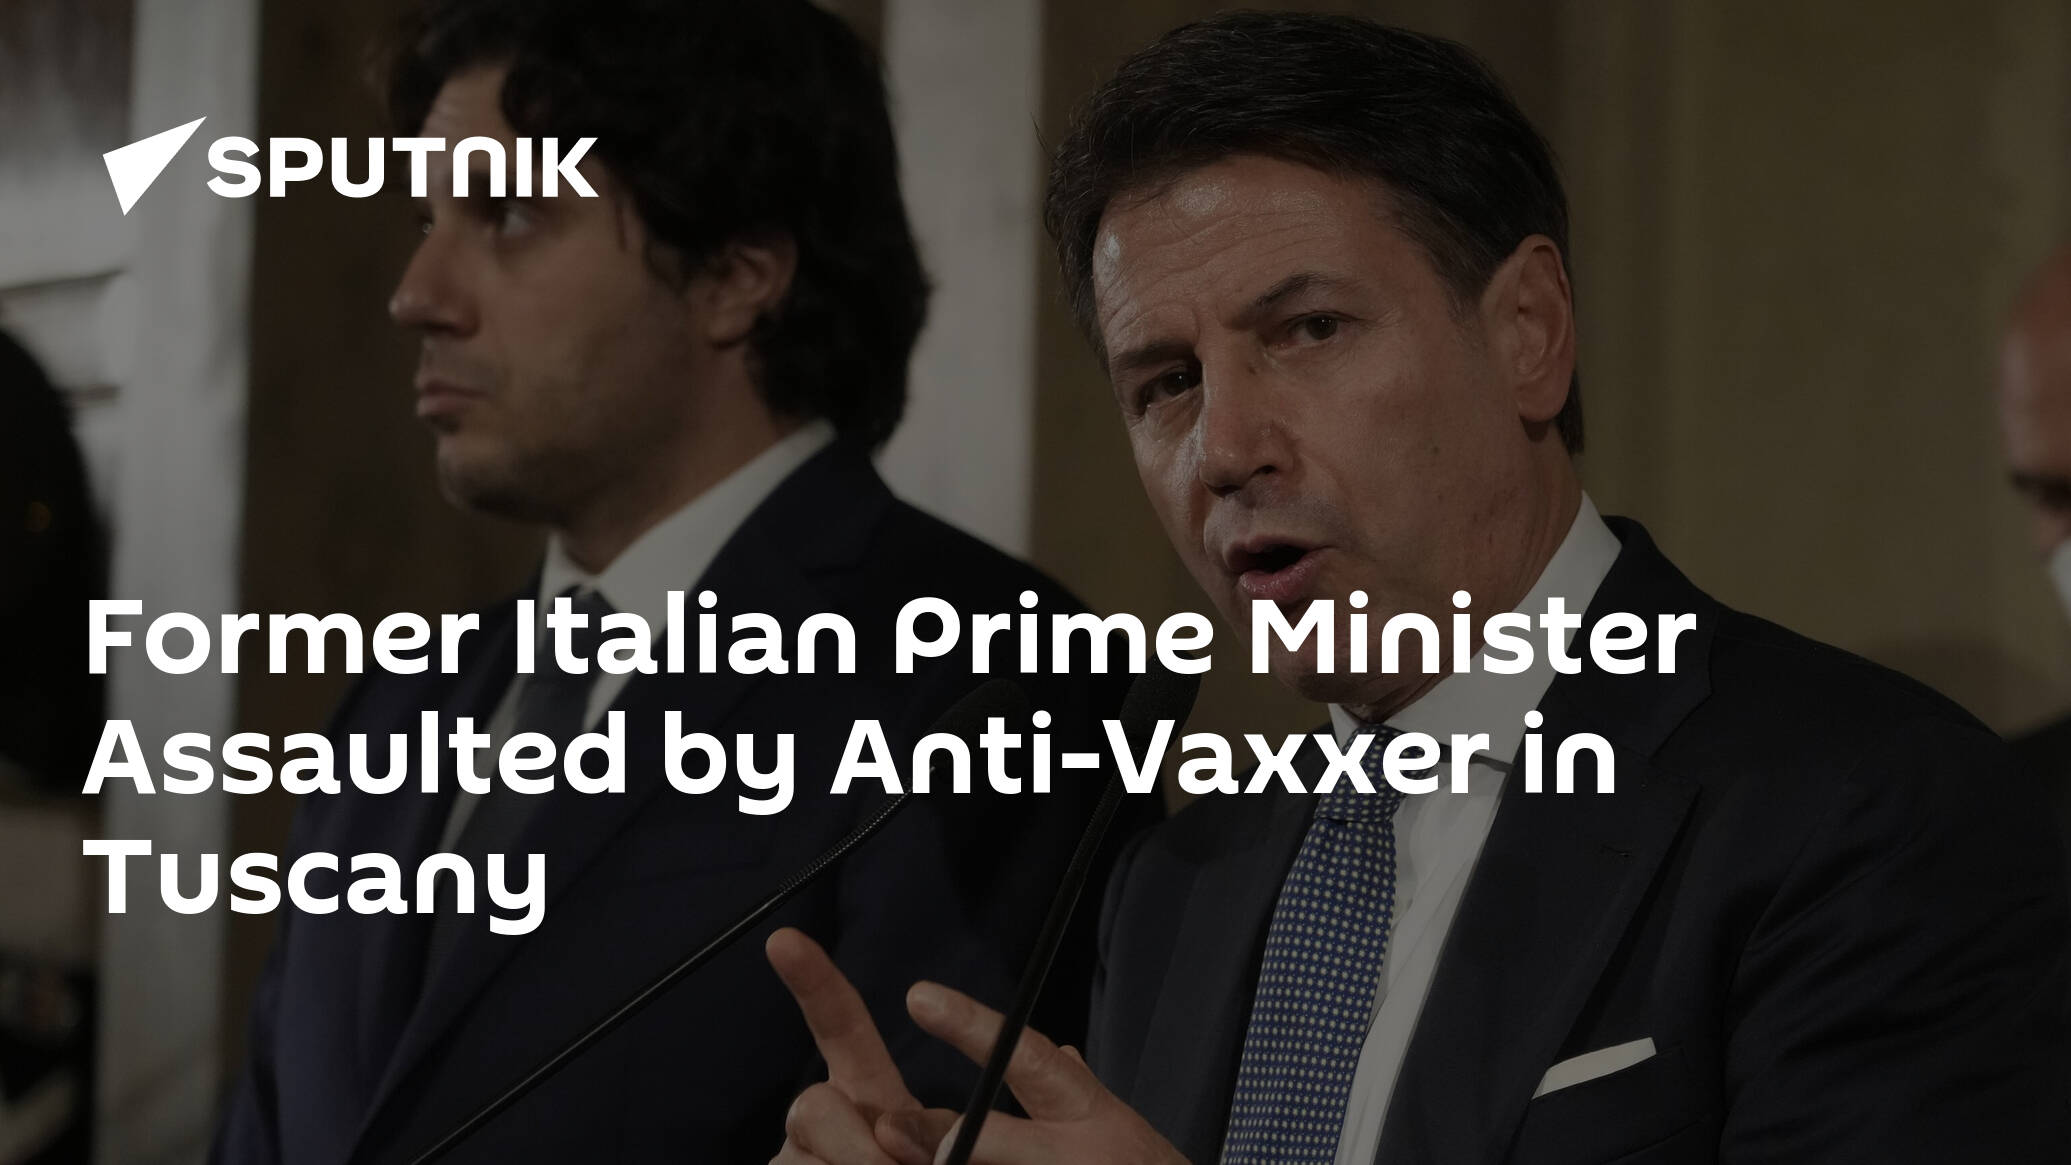 Former Italian Prime Minister Assaulted by Anti-Vaxxer in Tuscany